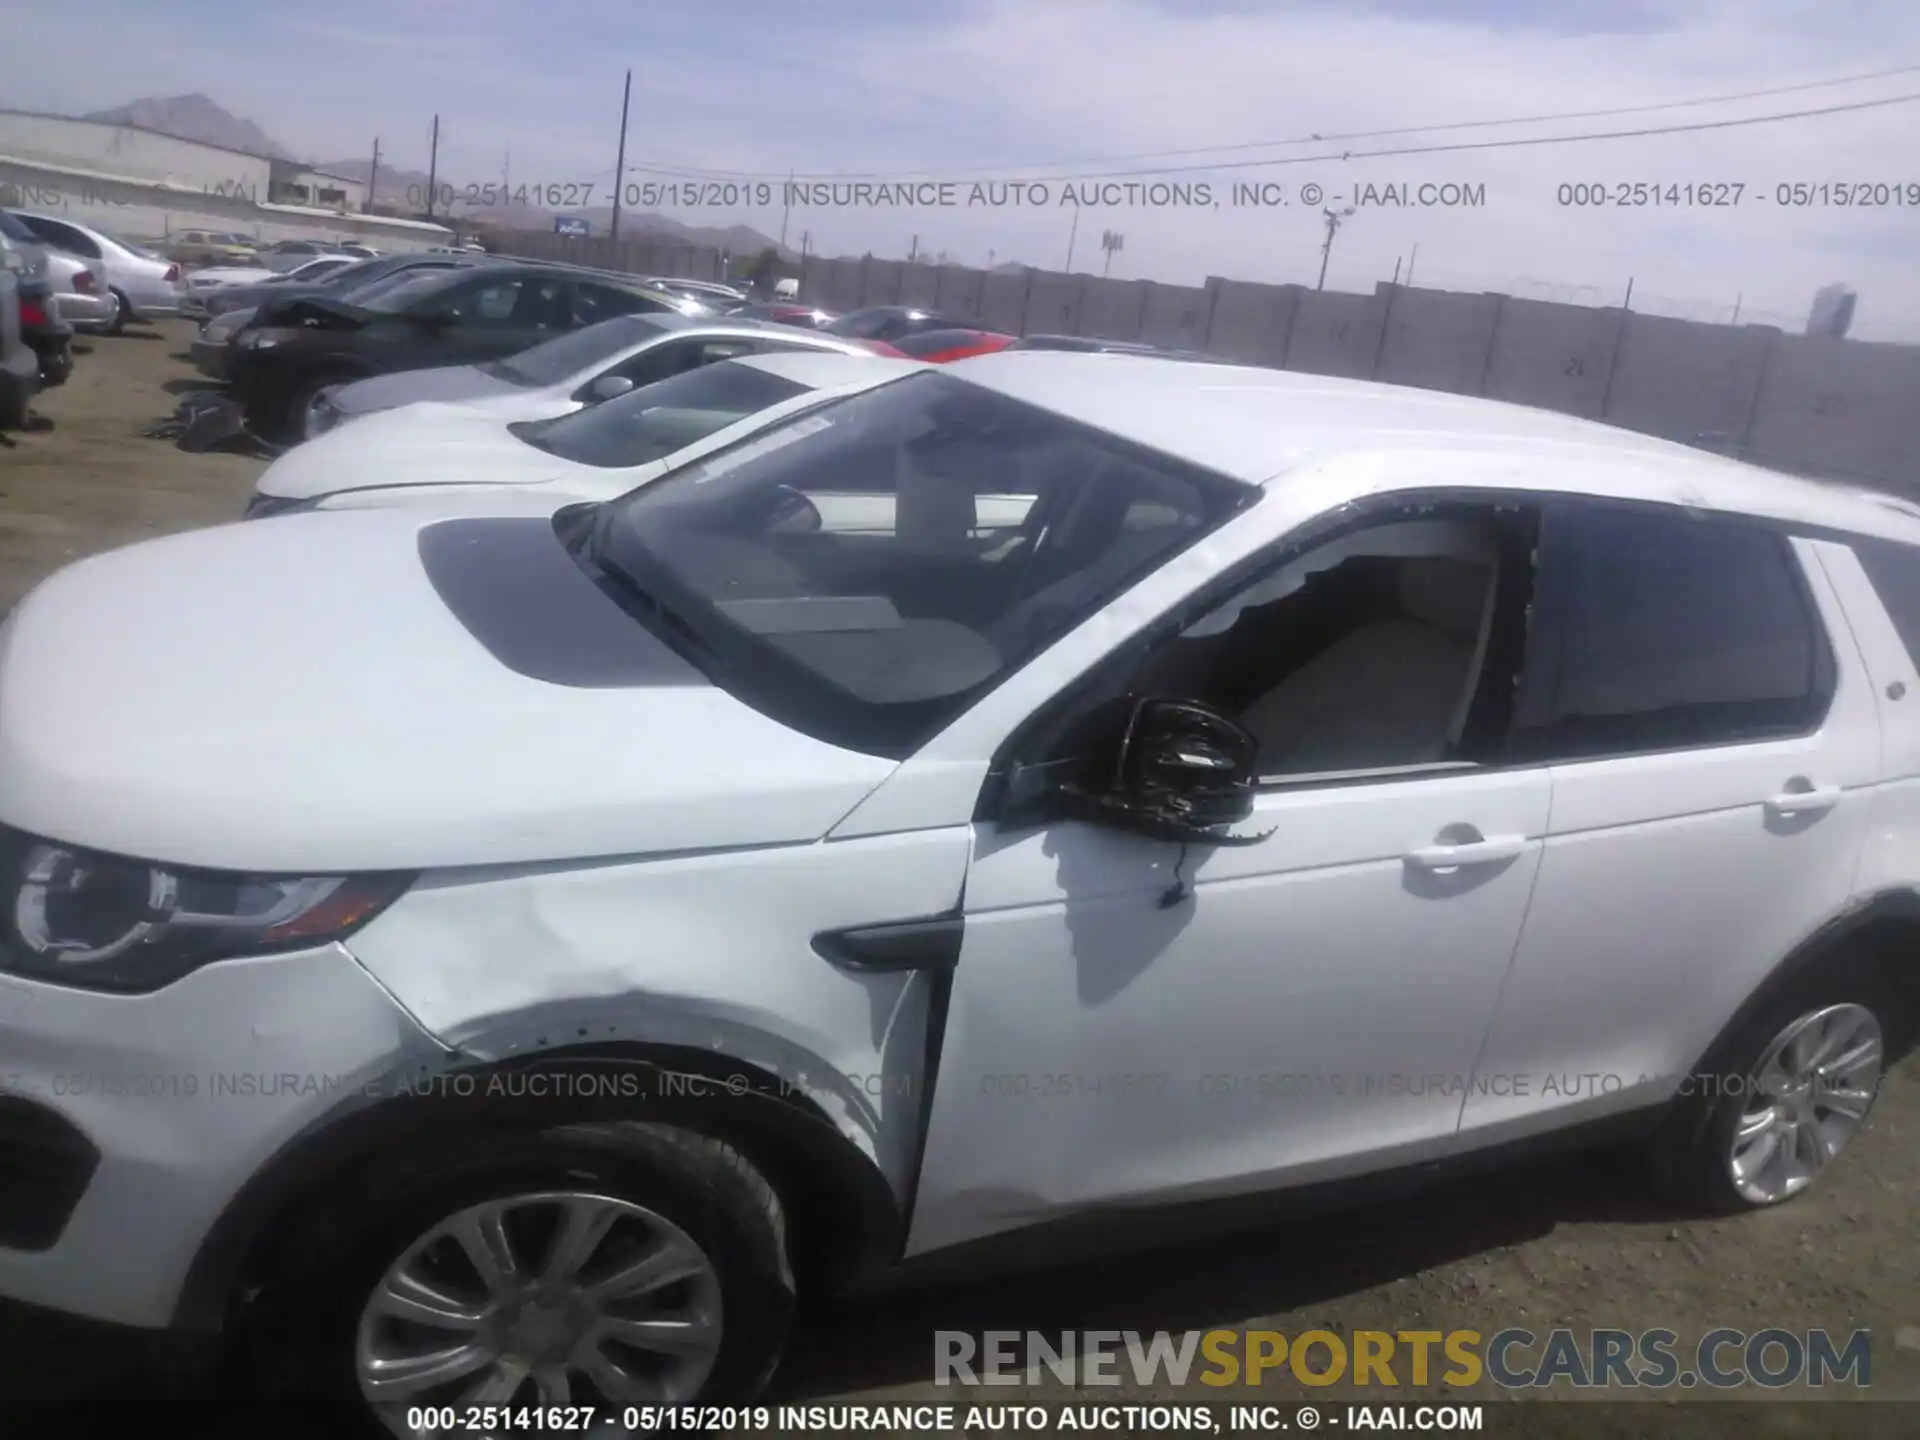 6 Photograph of a damaged car SALCP2FXXKH799937 LAND ROVER DISCOVERY SPORT 2019